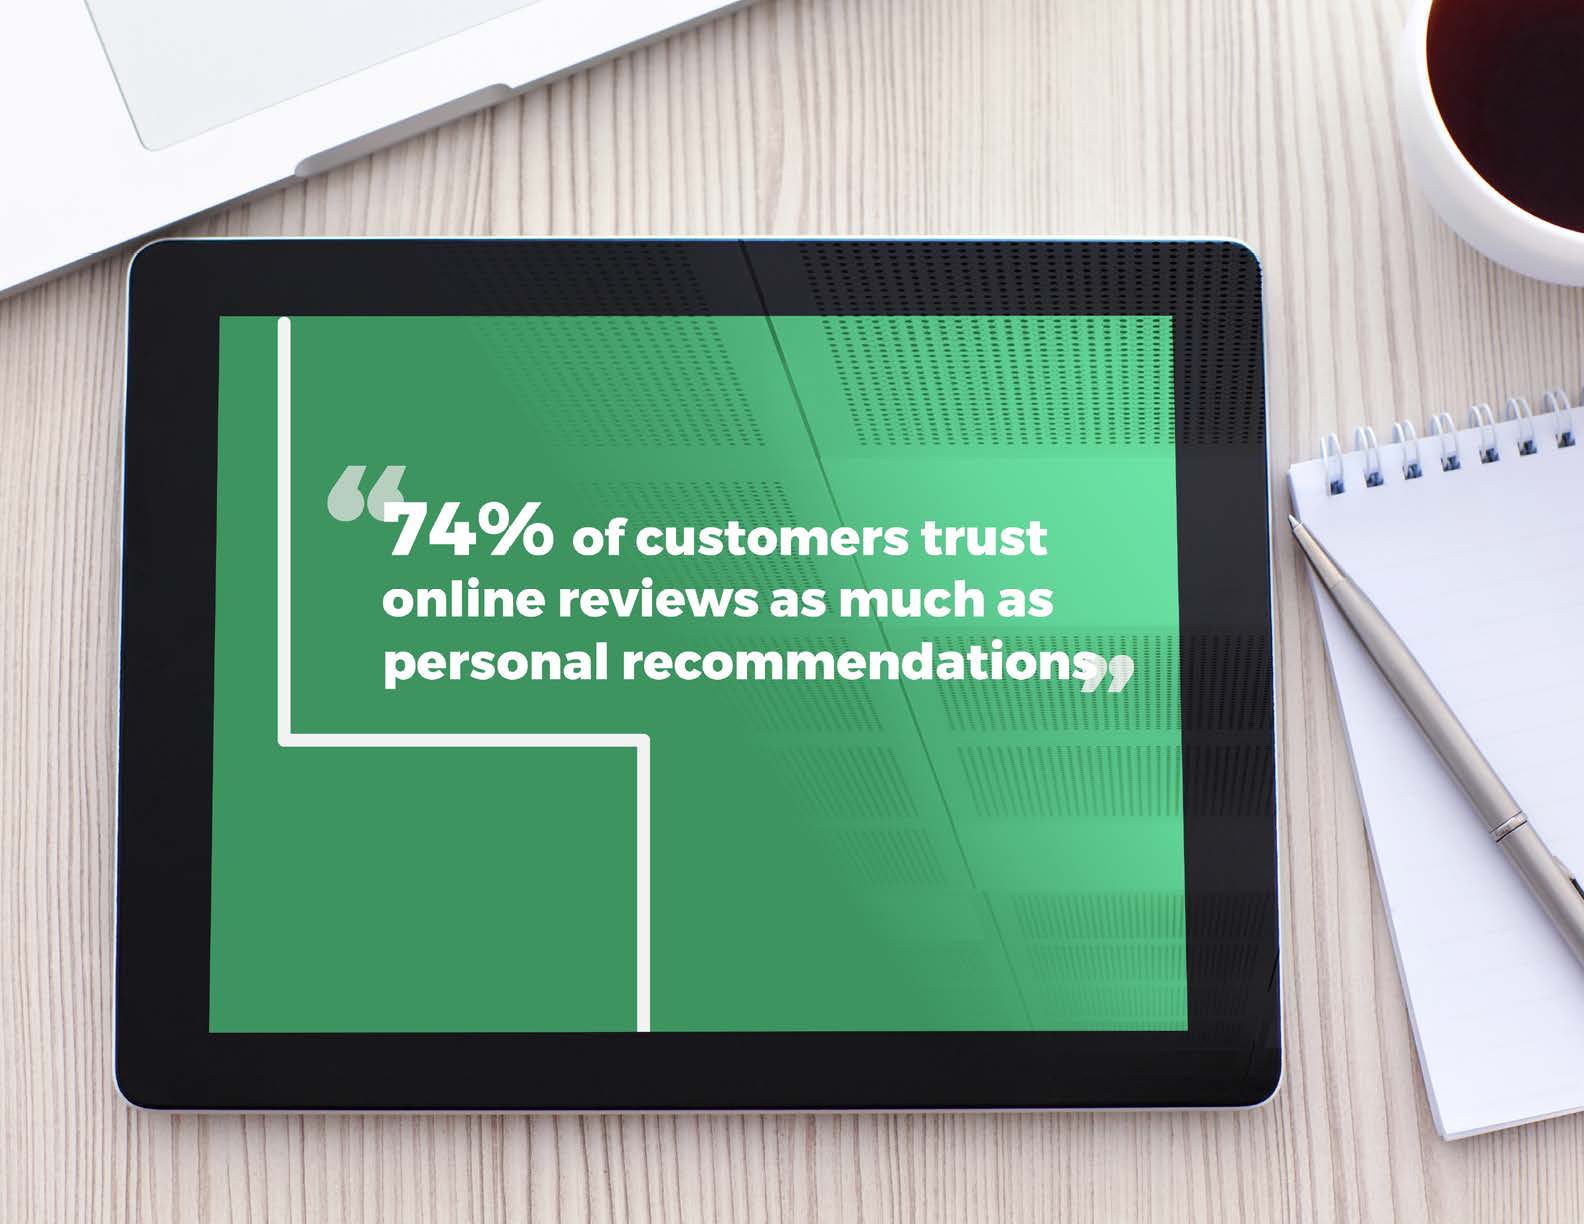 74% of customers trust online reviews